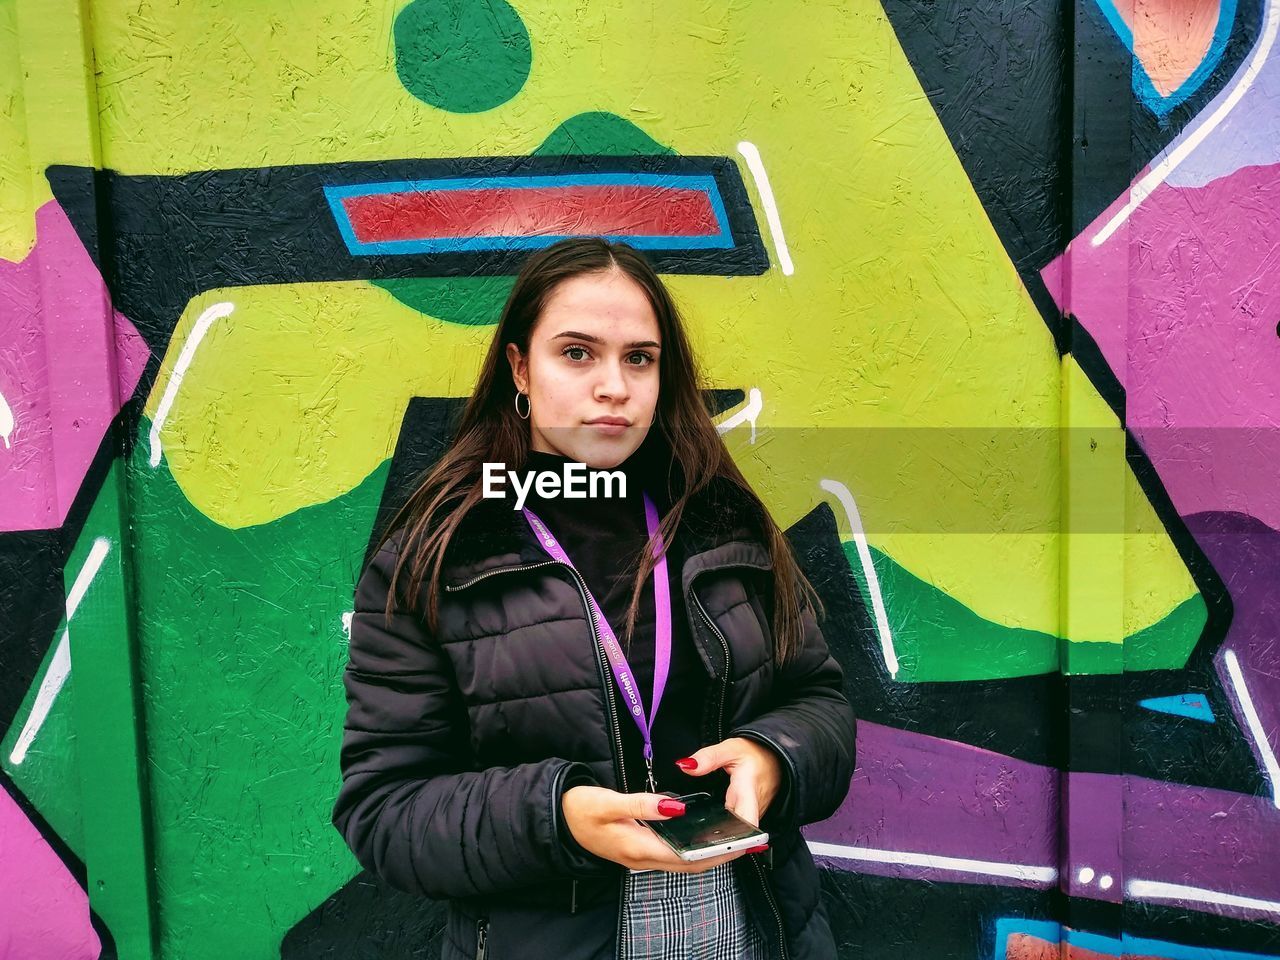 Portrait of young woman holding mobile phone against colorful graffiti wall